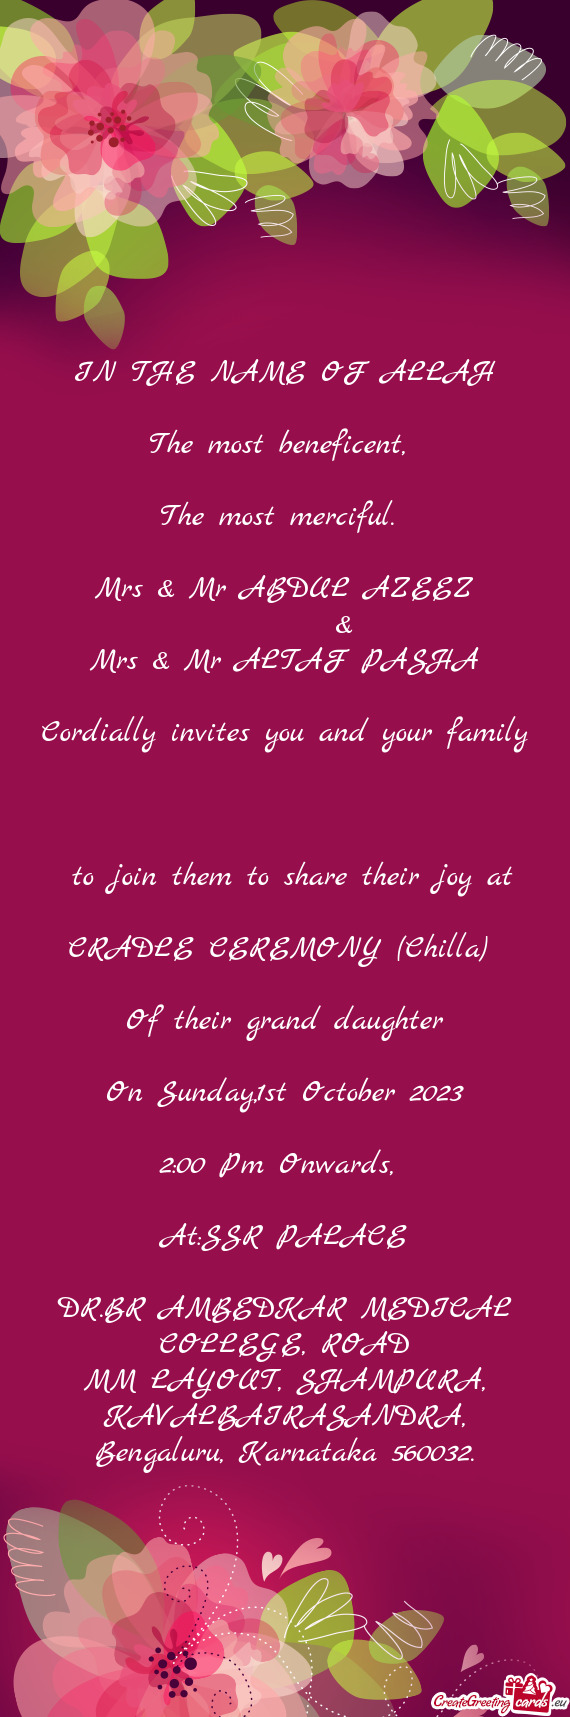 Mrs & Mr ABDUL AZEEZ   & Mrs & Mr ALTAF PASHA Cordially invites you and your family